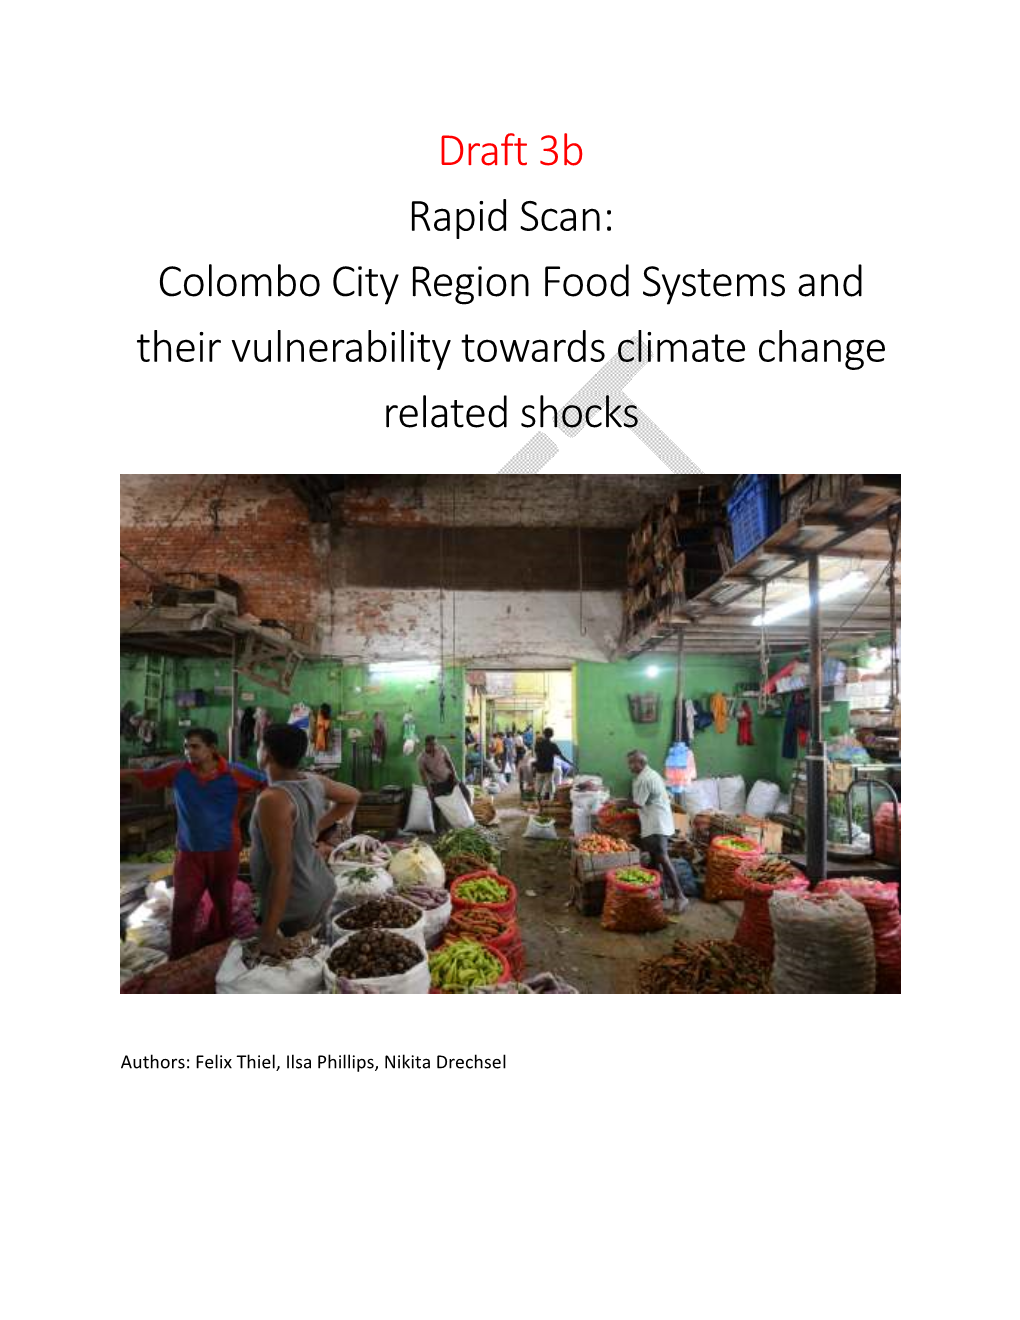 Colombo City Region Food Systems and Their Vulnerability Towards Climate Change Related Shocks